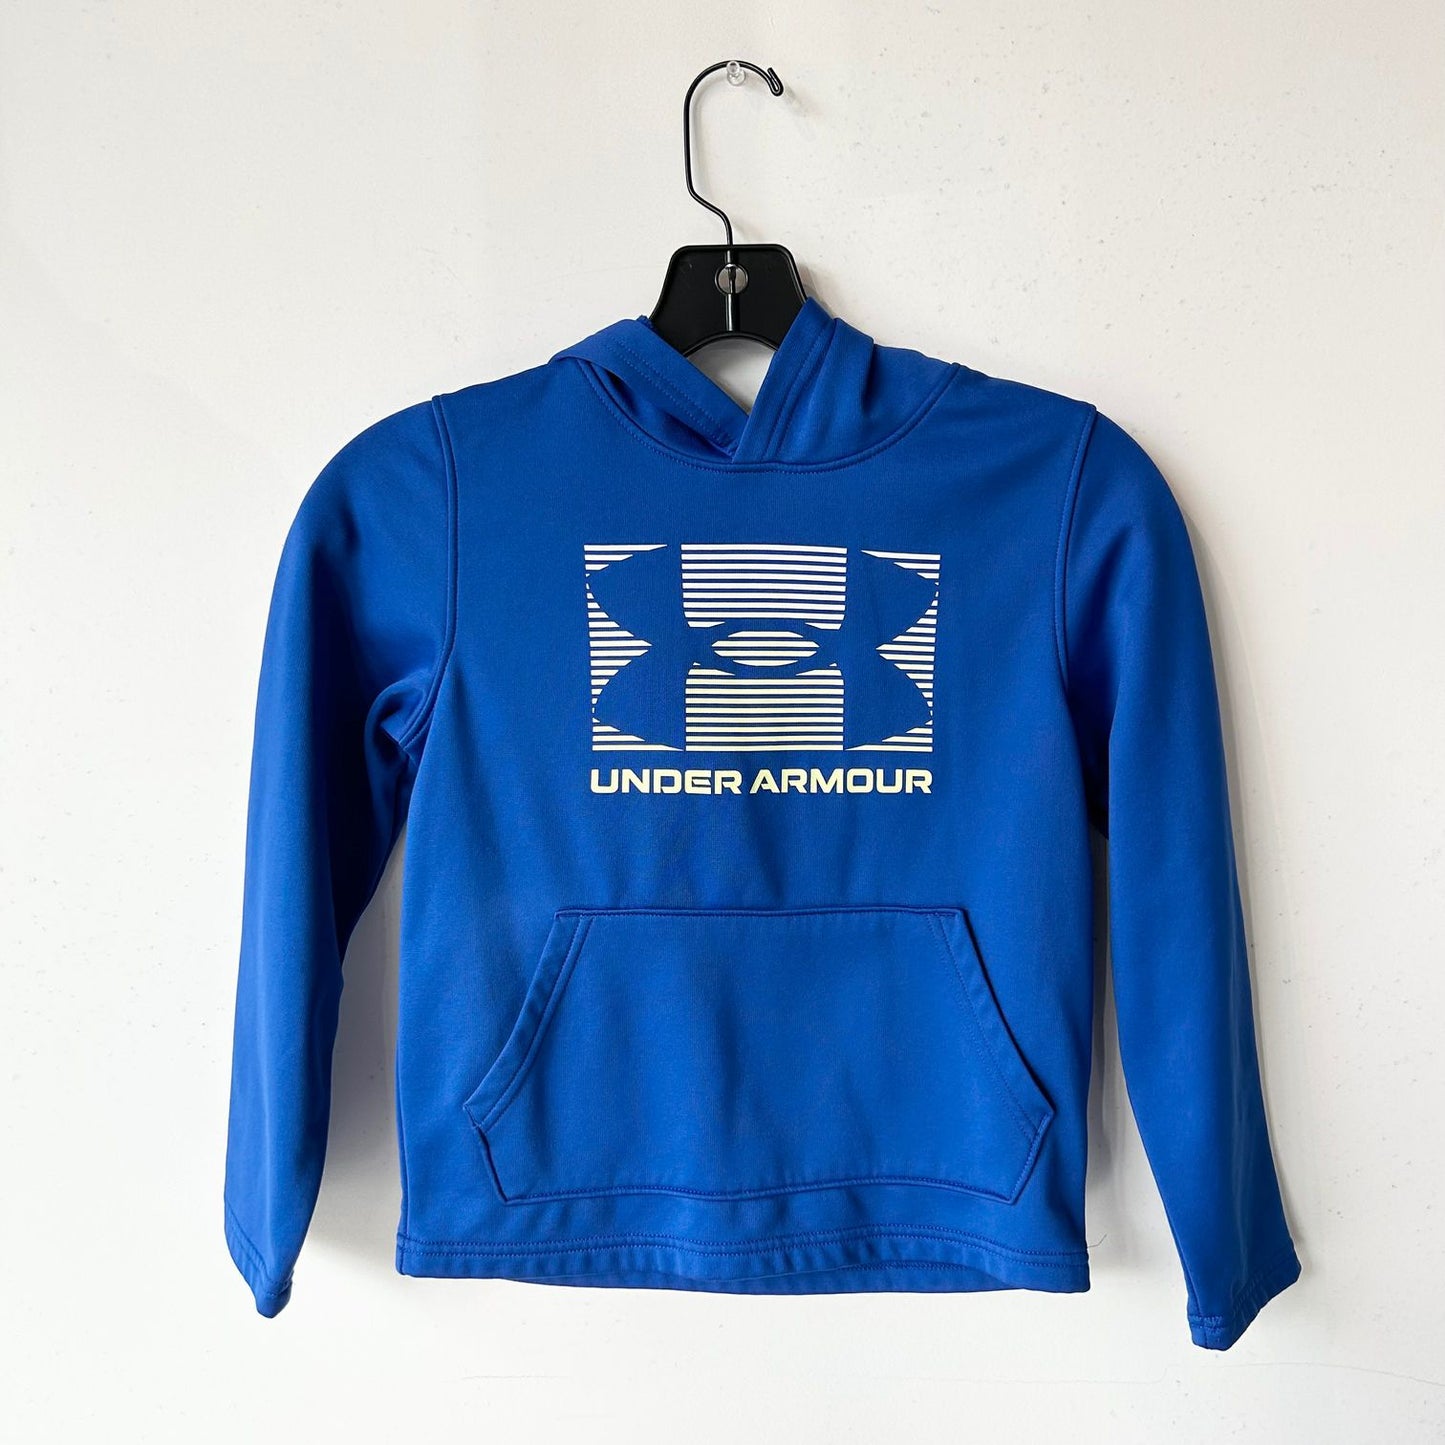 S Blue Under Armour Sweater